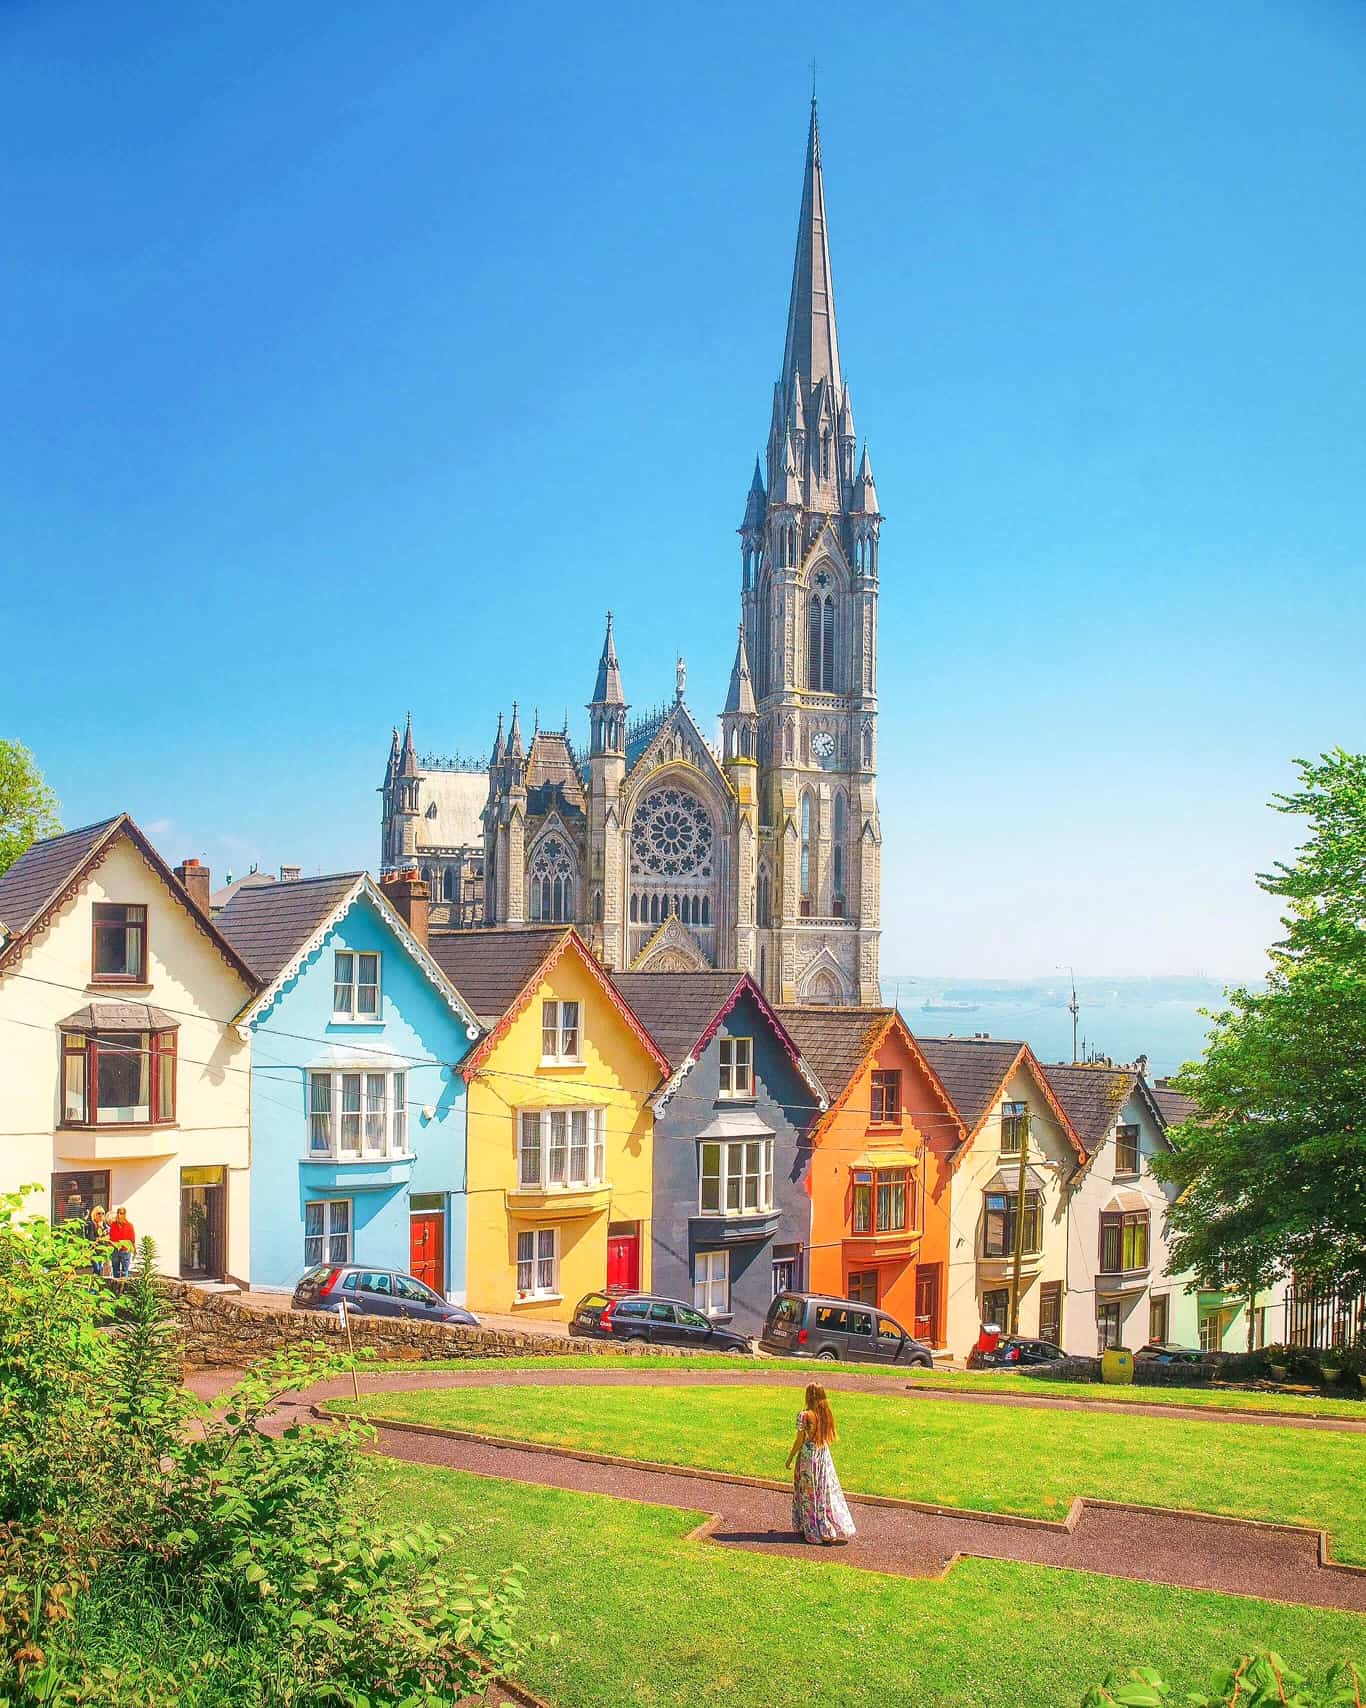 Woman in a dress in front of the colorful card houses and the cathedral in Cobh, Ireland.